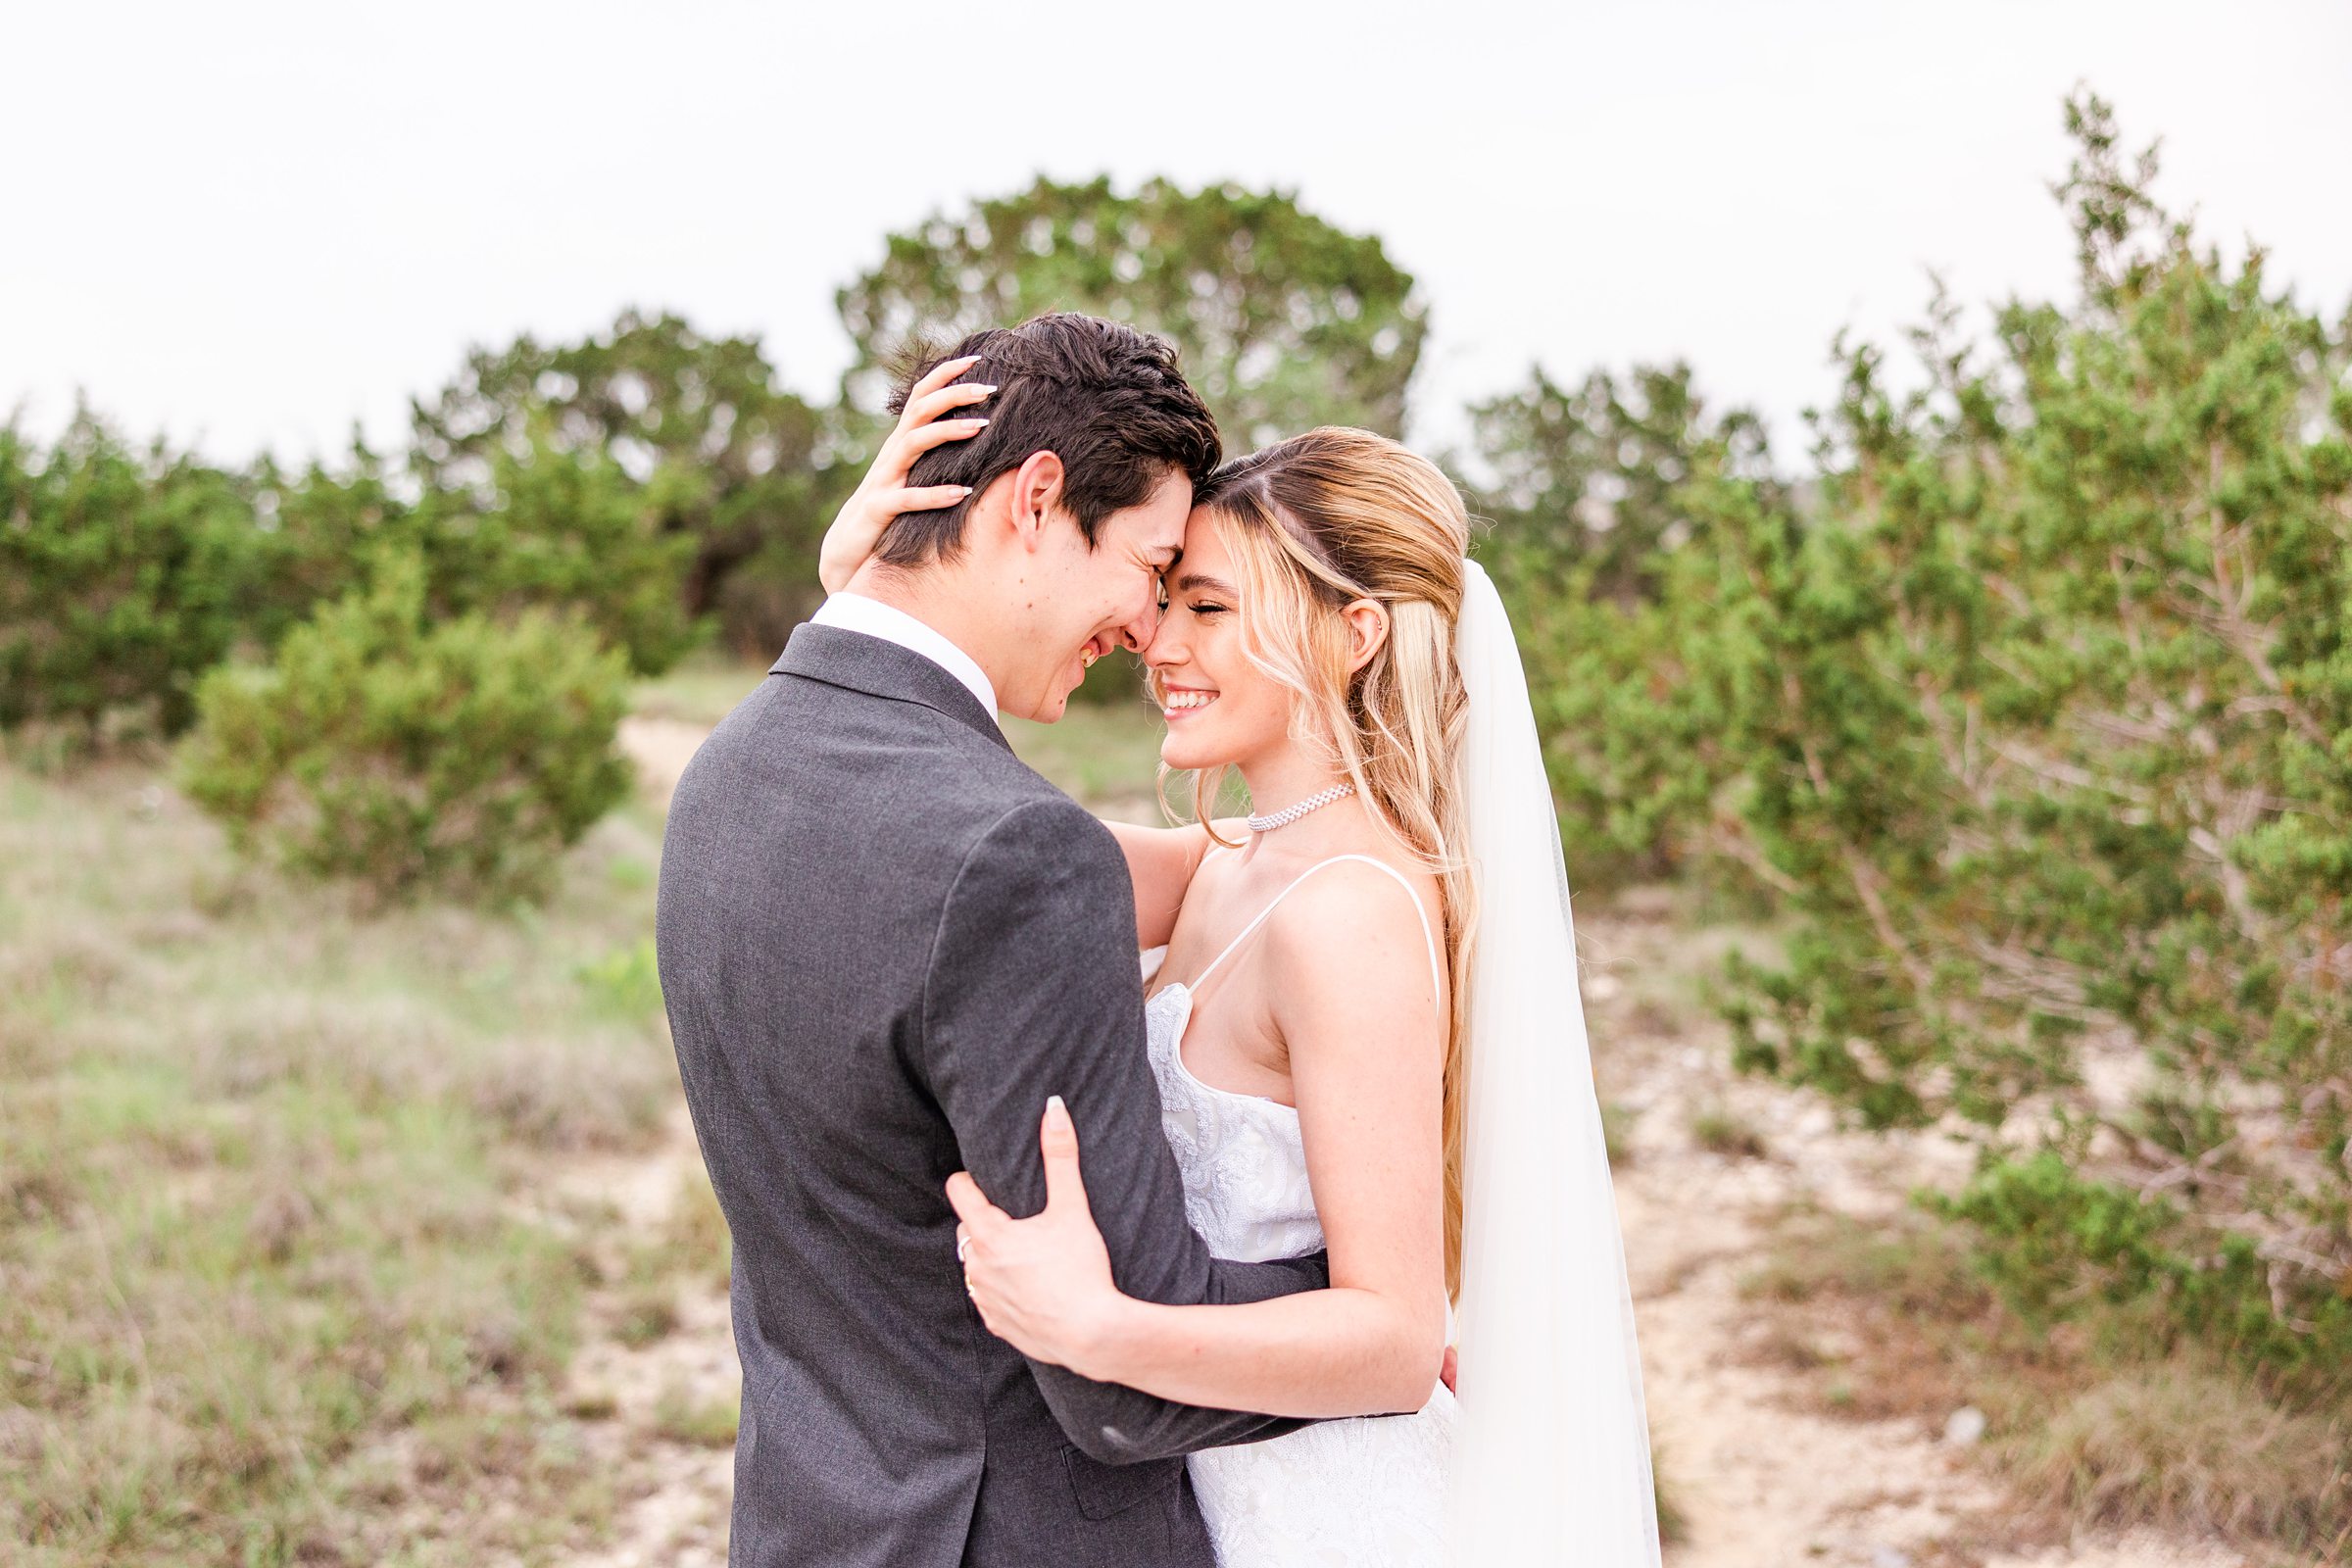 Bride and groom embrace during their wedding at the Terrace Club in Dripping Springs, Texas.